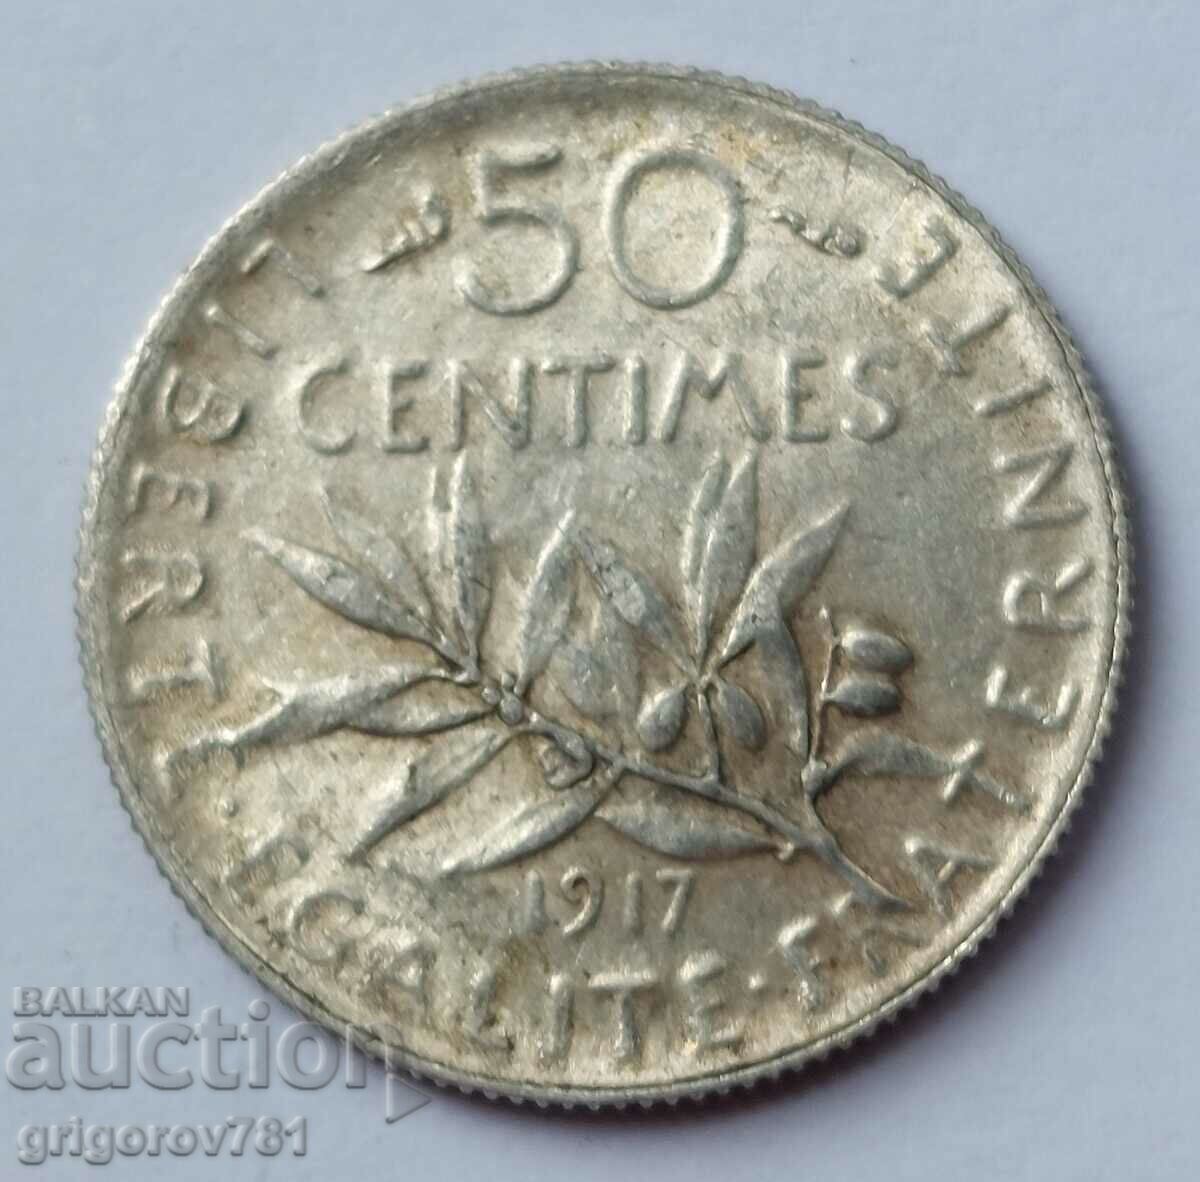 50 centimes silver France 1917 - silver coin №36